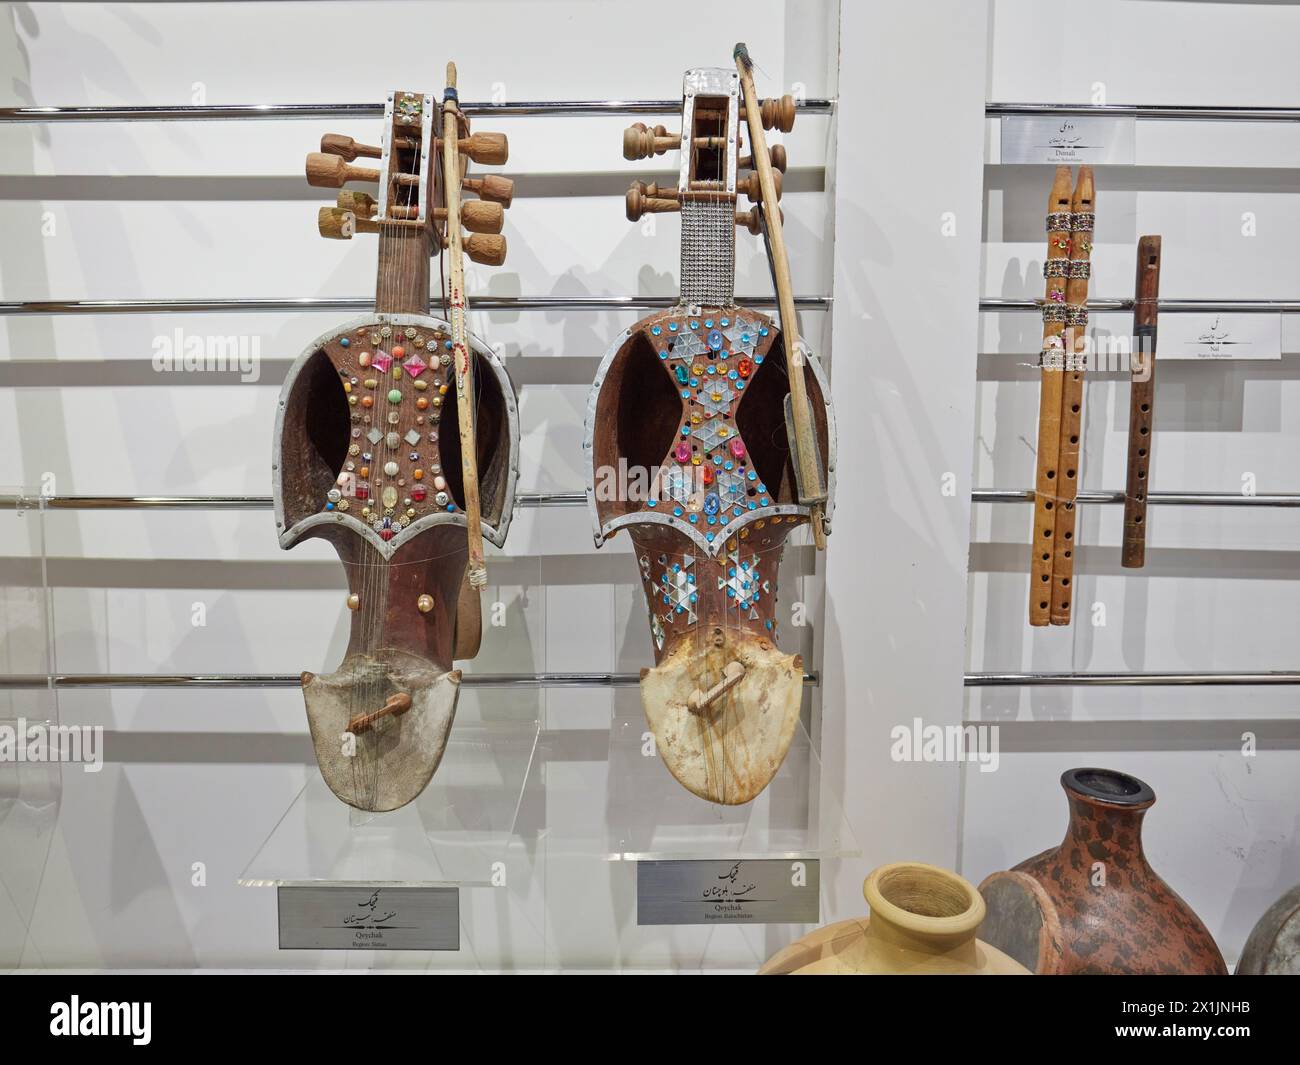 Persian ghaychaks, or gheychaks (bowed double-chambered bowl lutes) made from horse sculls, displayed in the Isfahan Music Museum. Isfahan, Iran. Stock Photo